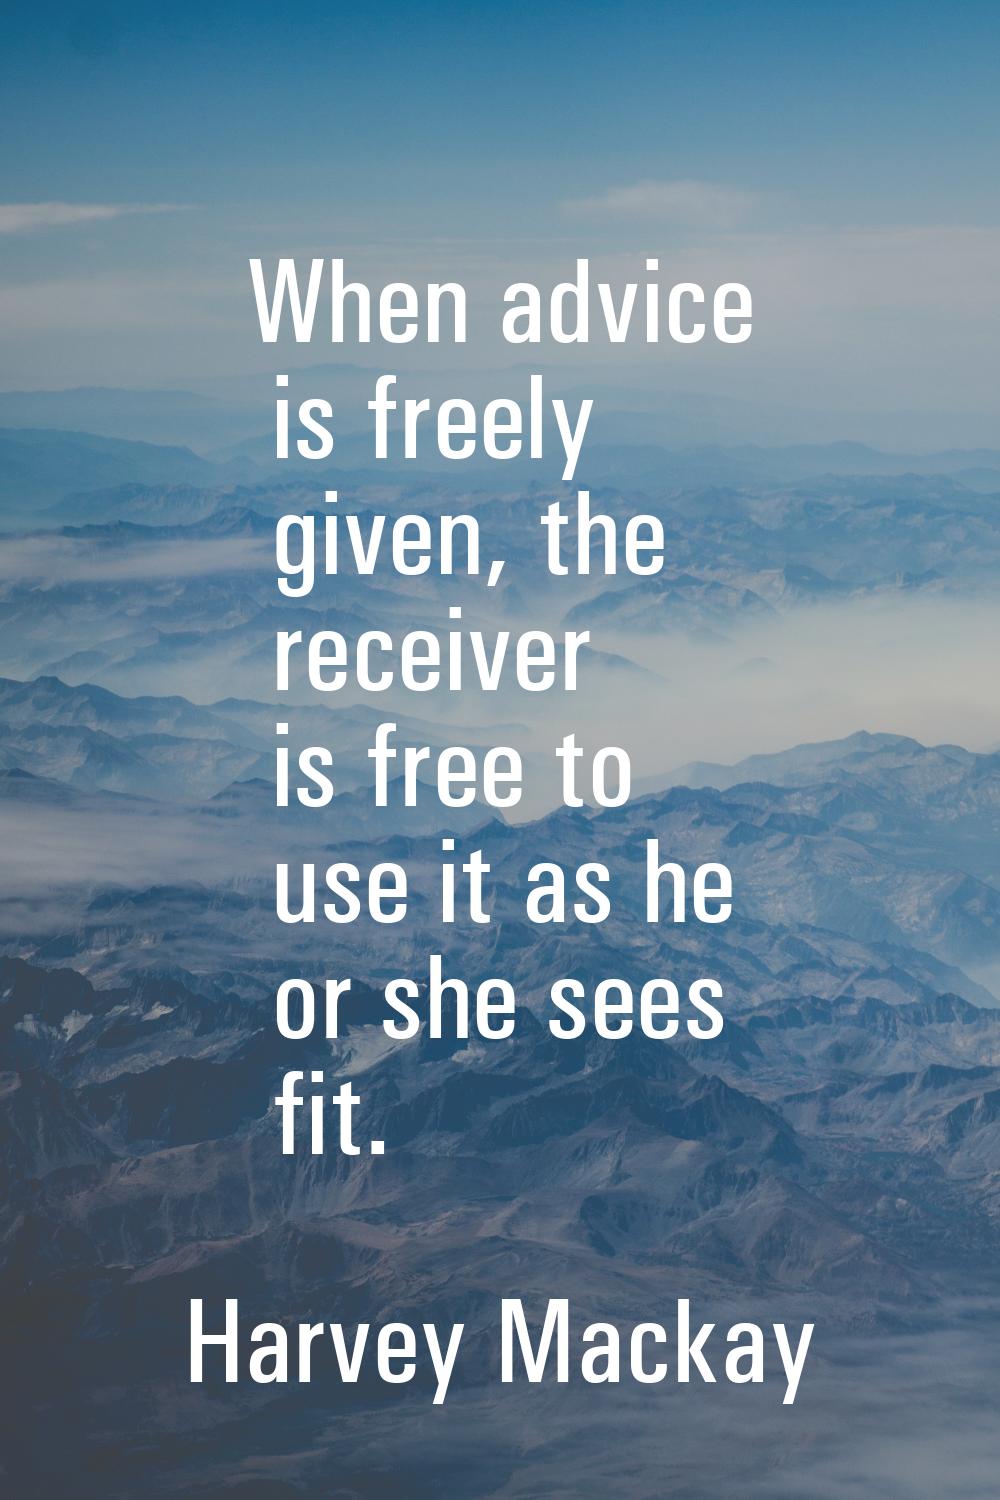 When advice is freely given, the receiver is free to use it as he or she sees fit.